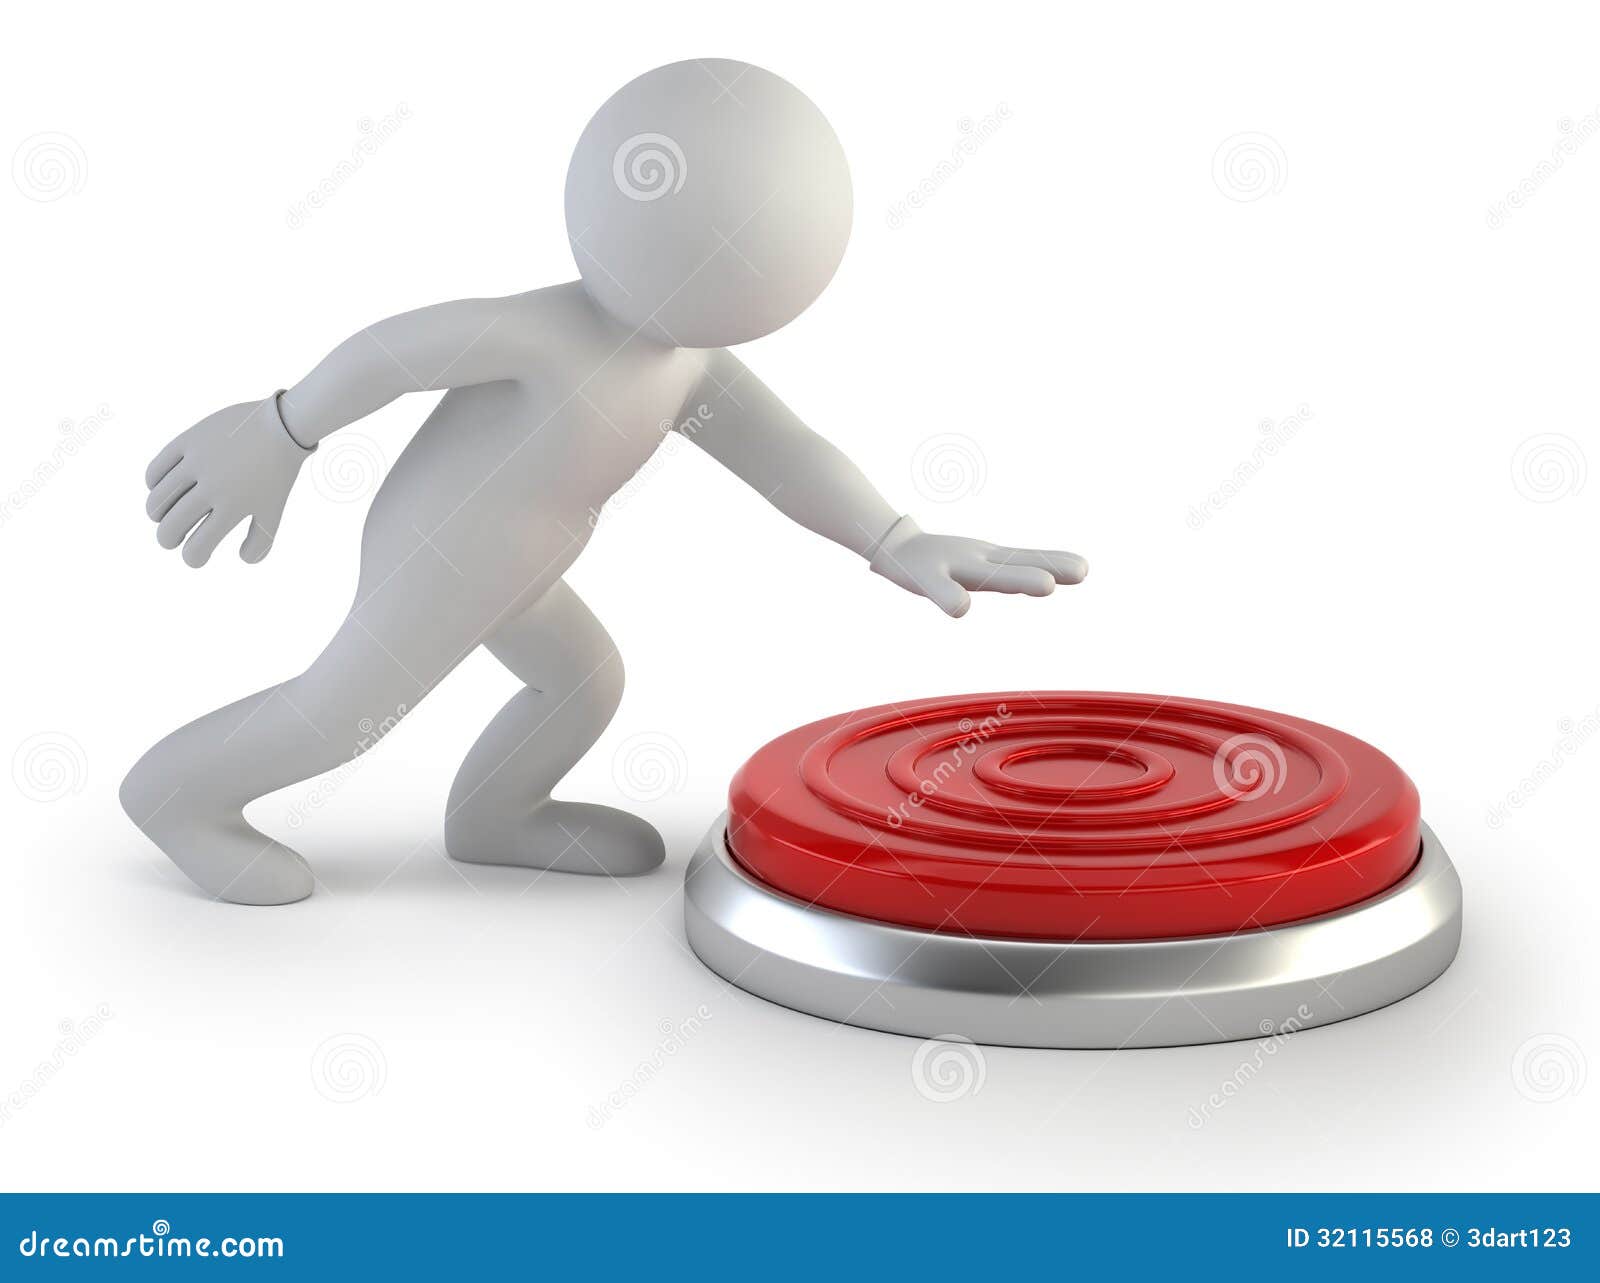 Big red button Stock Photos, Royalty Free Big red button Images